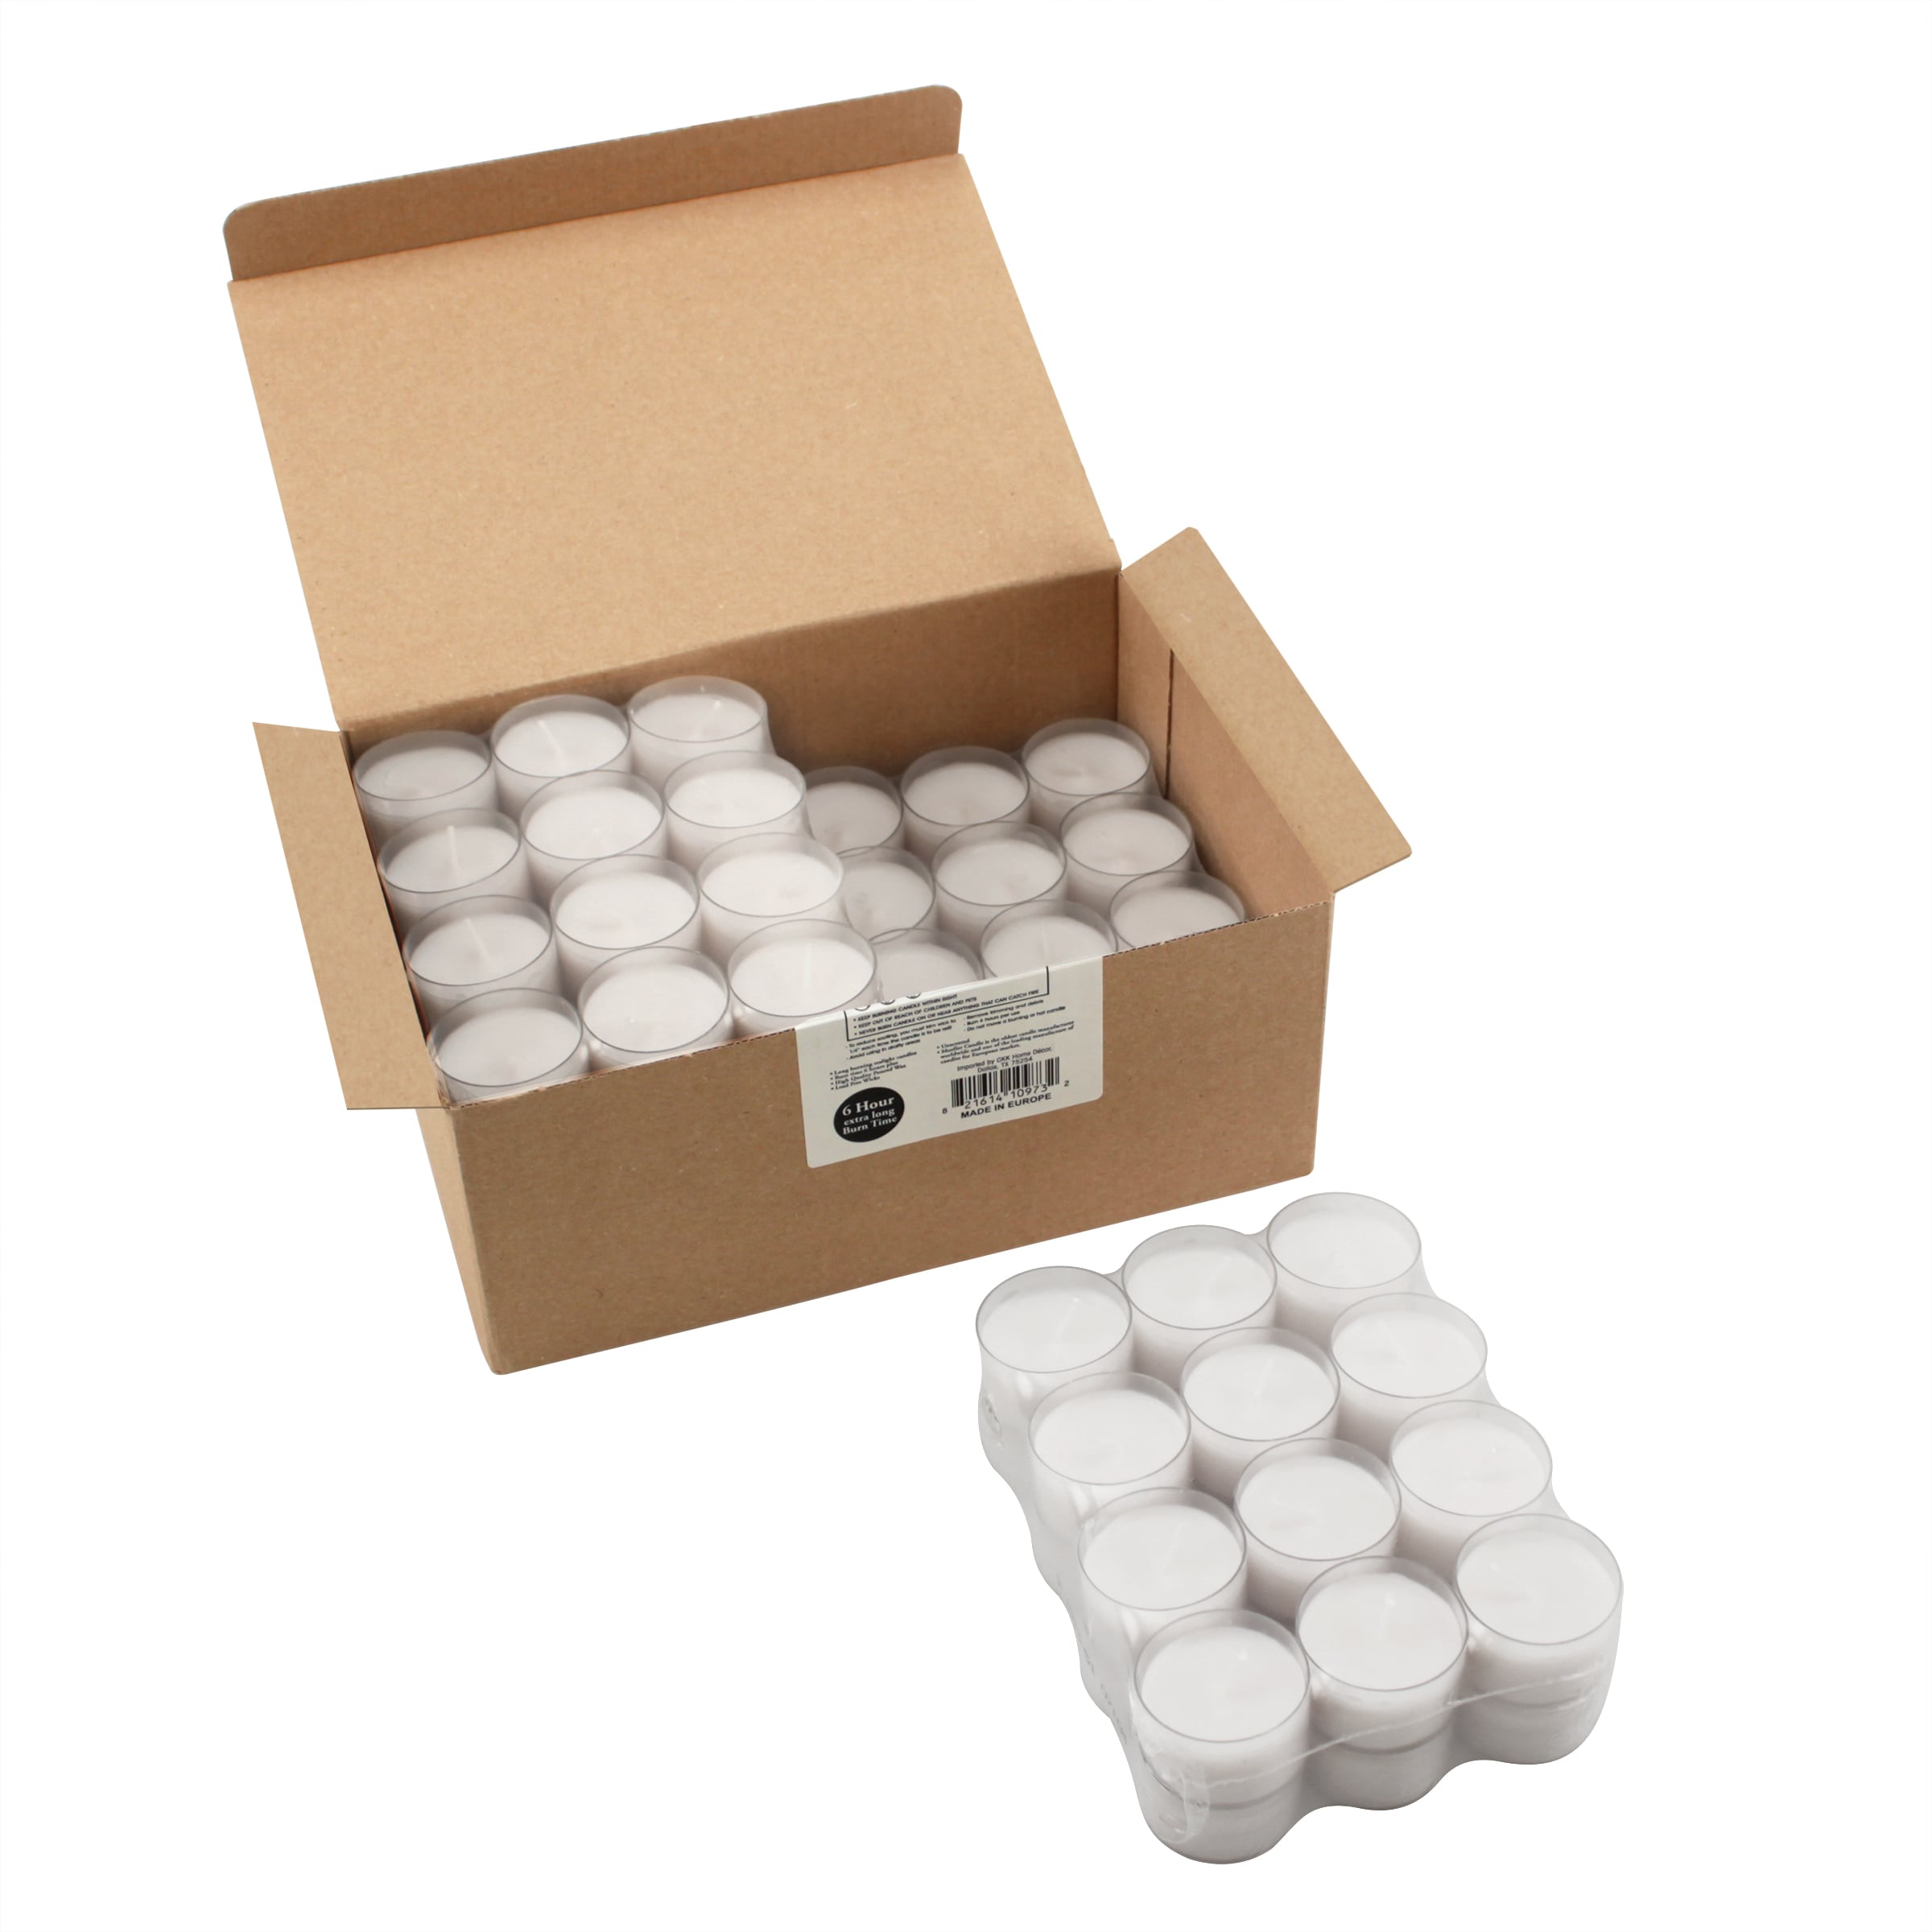 Stonebriar 6-7 Hour Long Burning Unscented Tea Light Candles White 200 Pack 